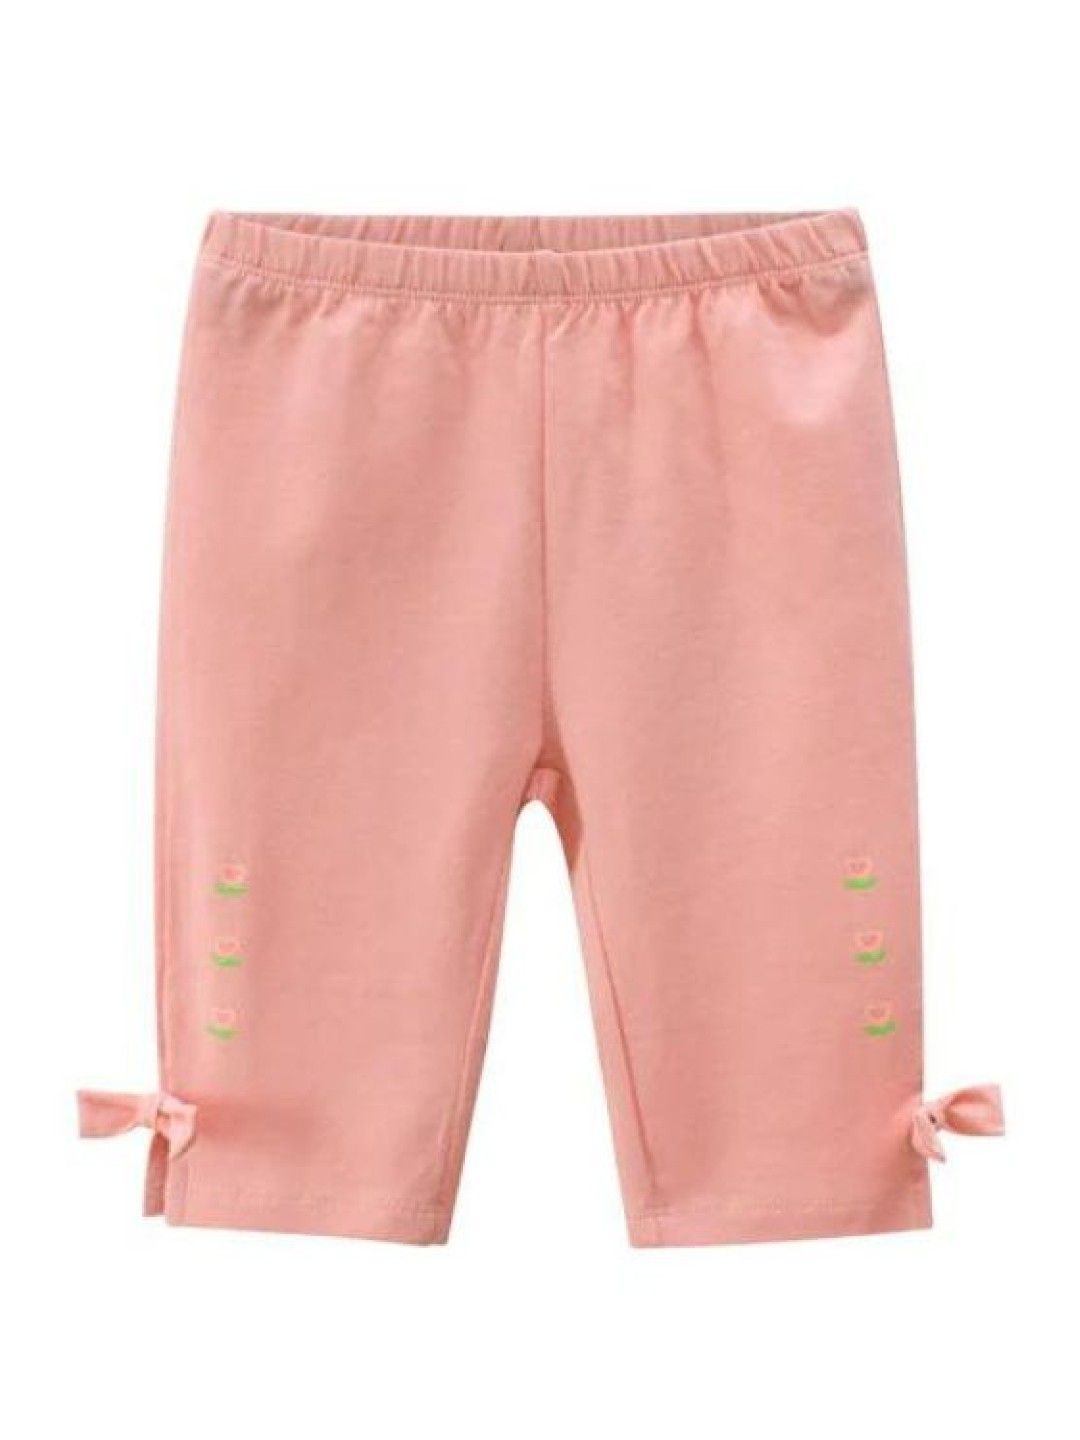 Cottonkind Girls Solid Three Fourth Length Shorts